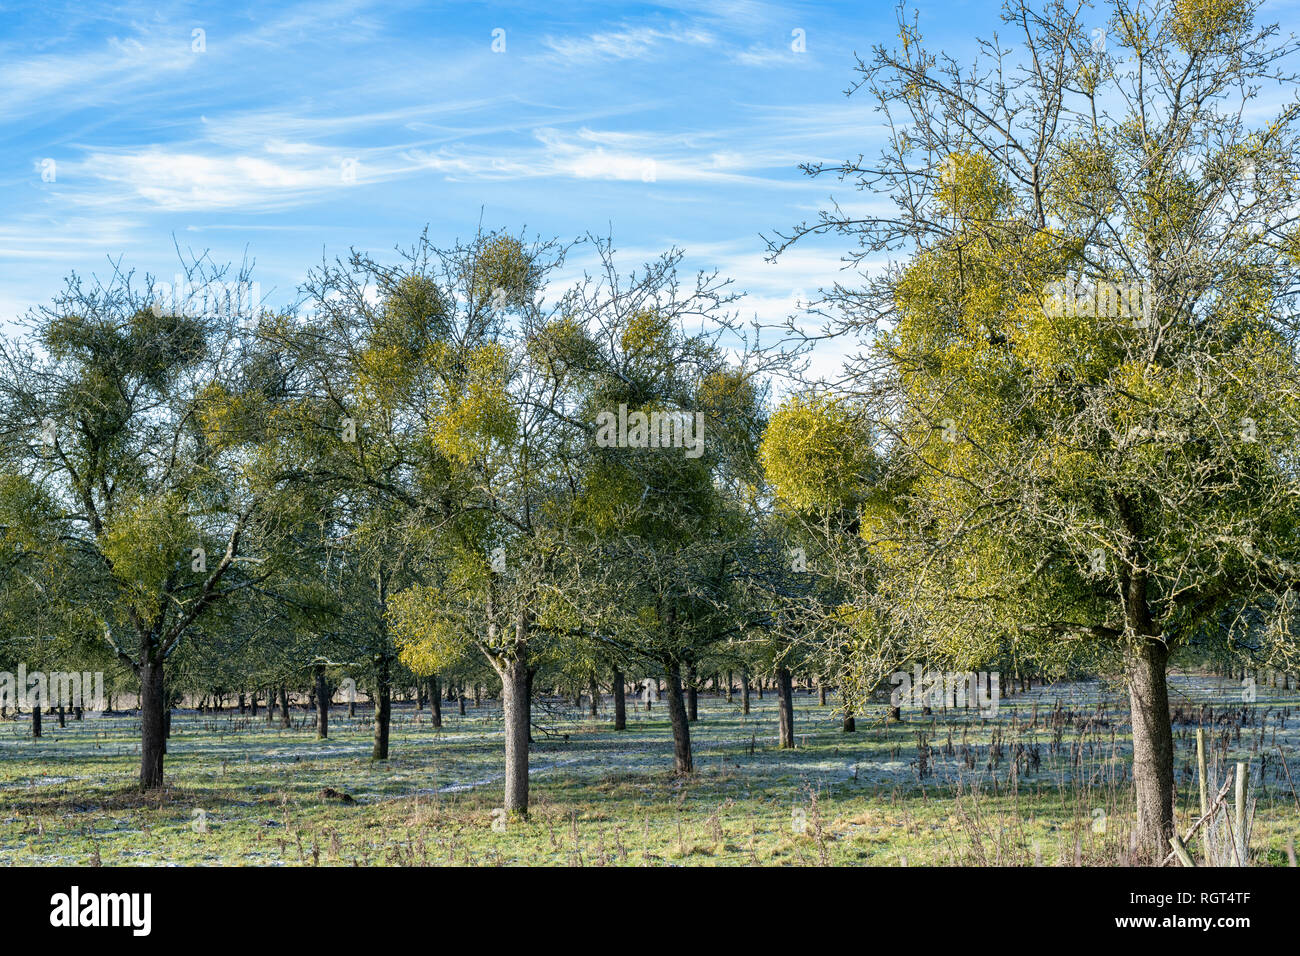 Viscum album. Mistletoe on apple trees in an orchard in the english countryside. Herefordshire, UK Stock Photo